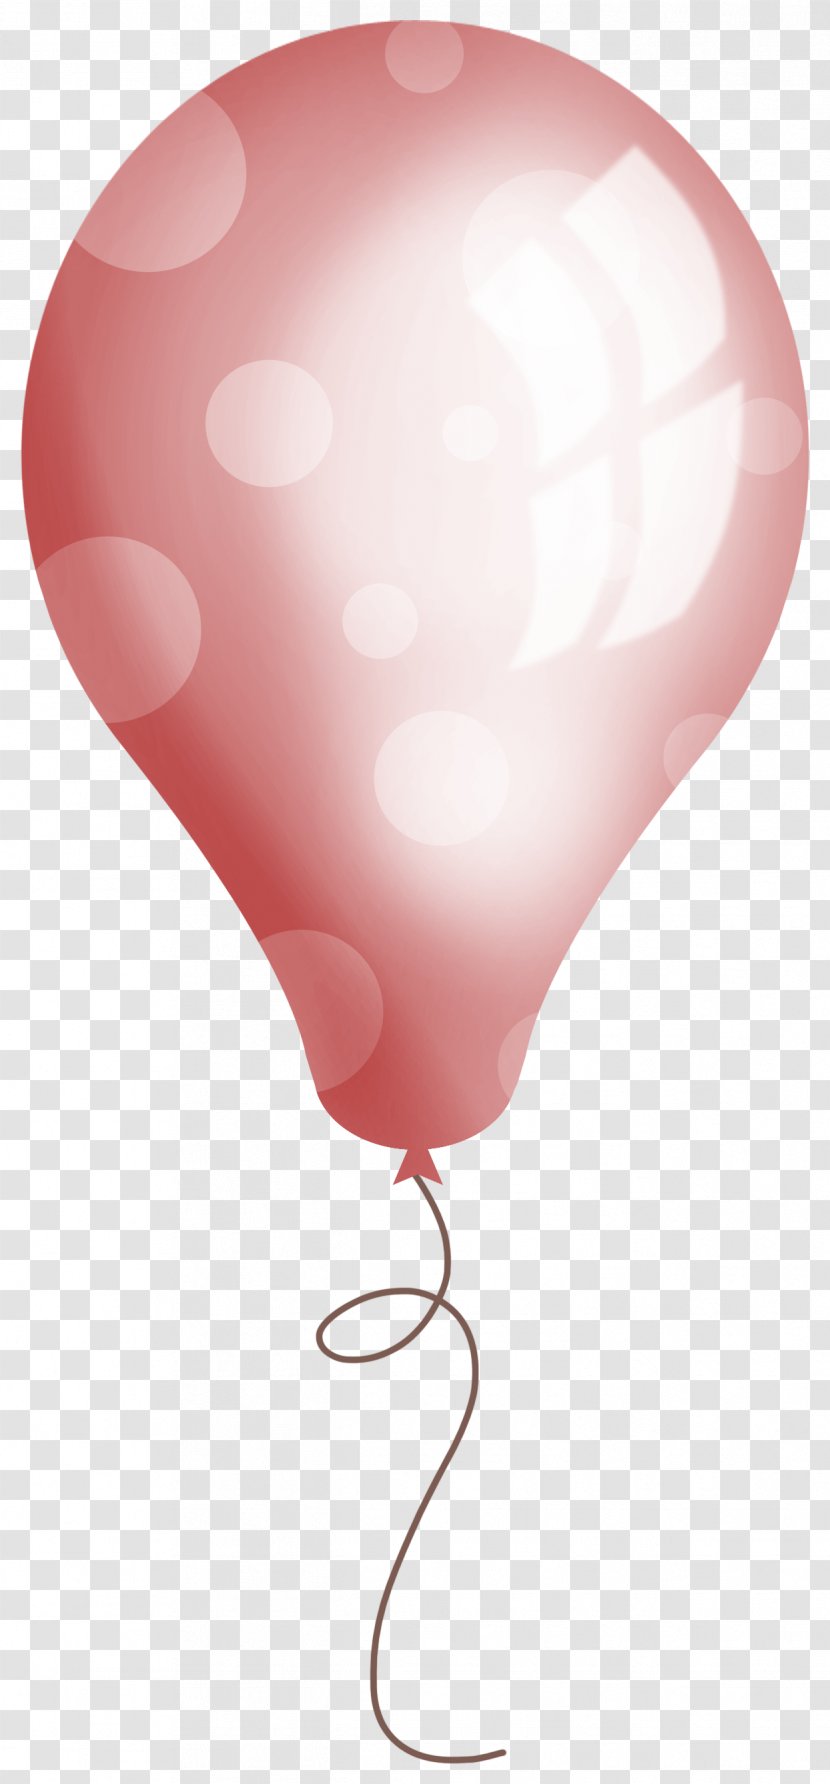 Toy Balloon Photography Helium Latex - 6 Transparent PNG